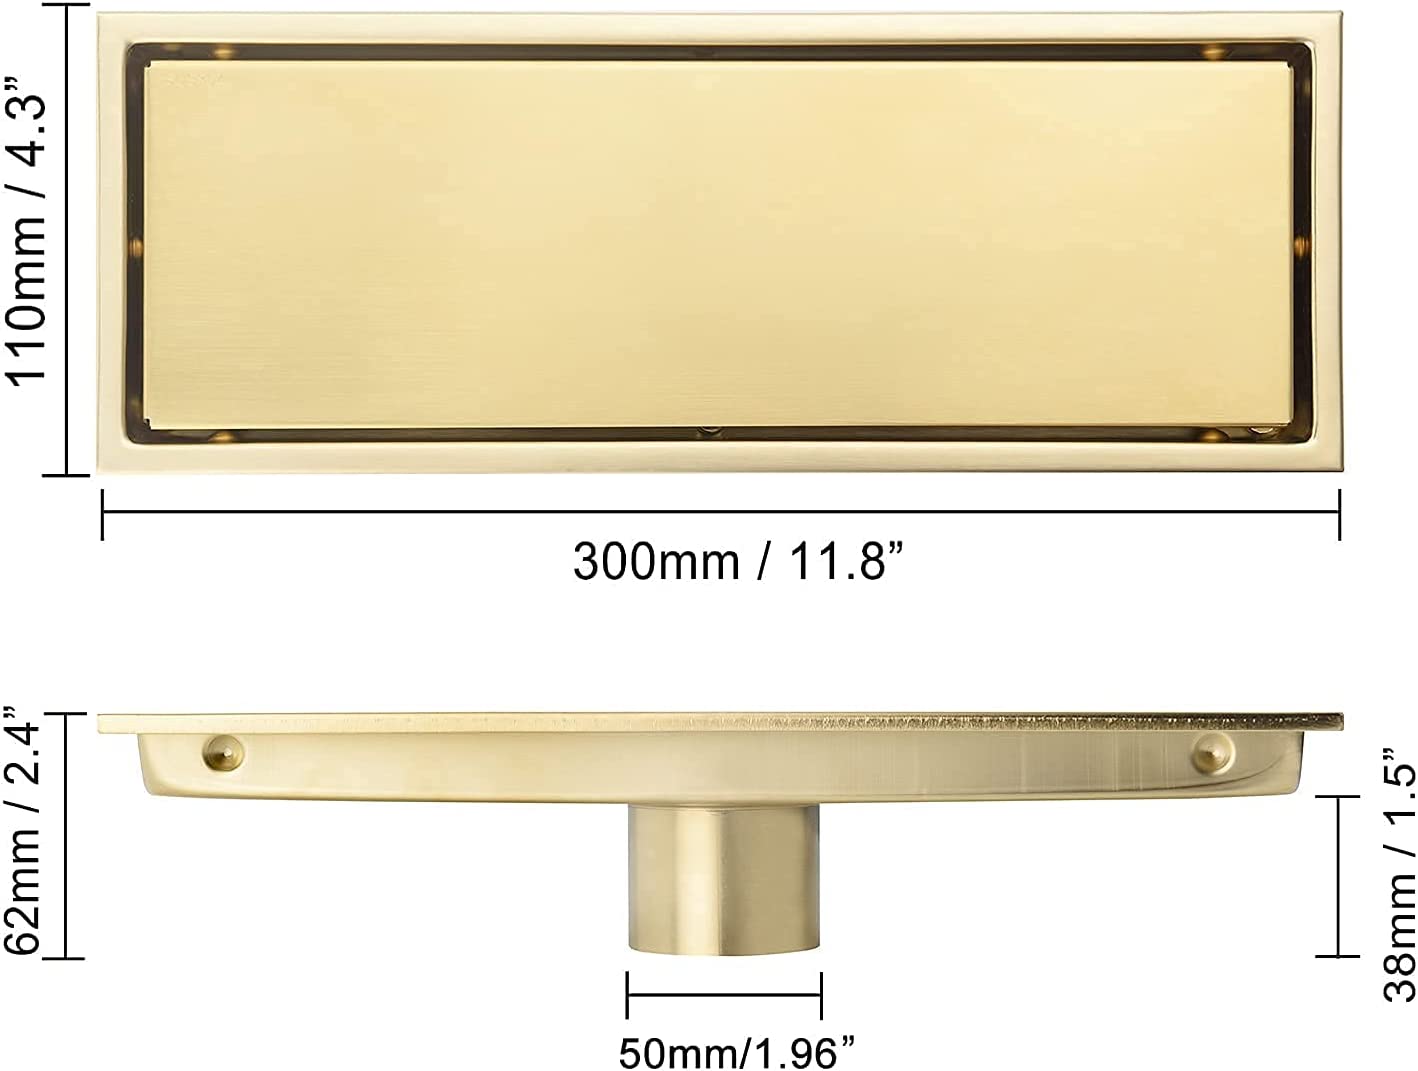 DEOKXZ Linear Shower Drain Pipe 12 Inches Brushed Gold, with Tile Insert Grille, Detachable Hidden Cover, SUS304 Stainless Steel Rectangular Floor Dra